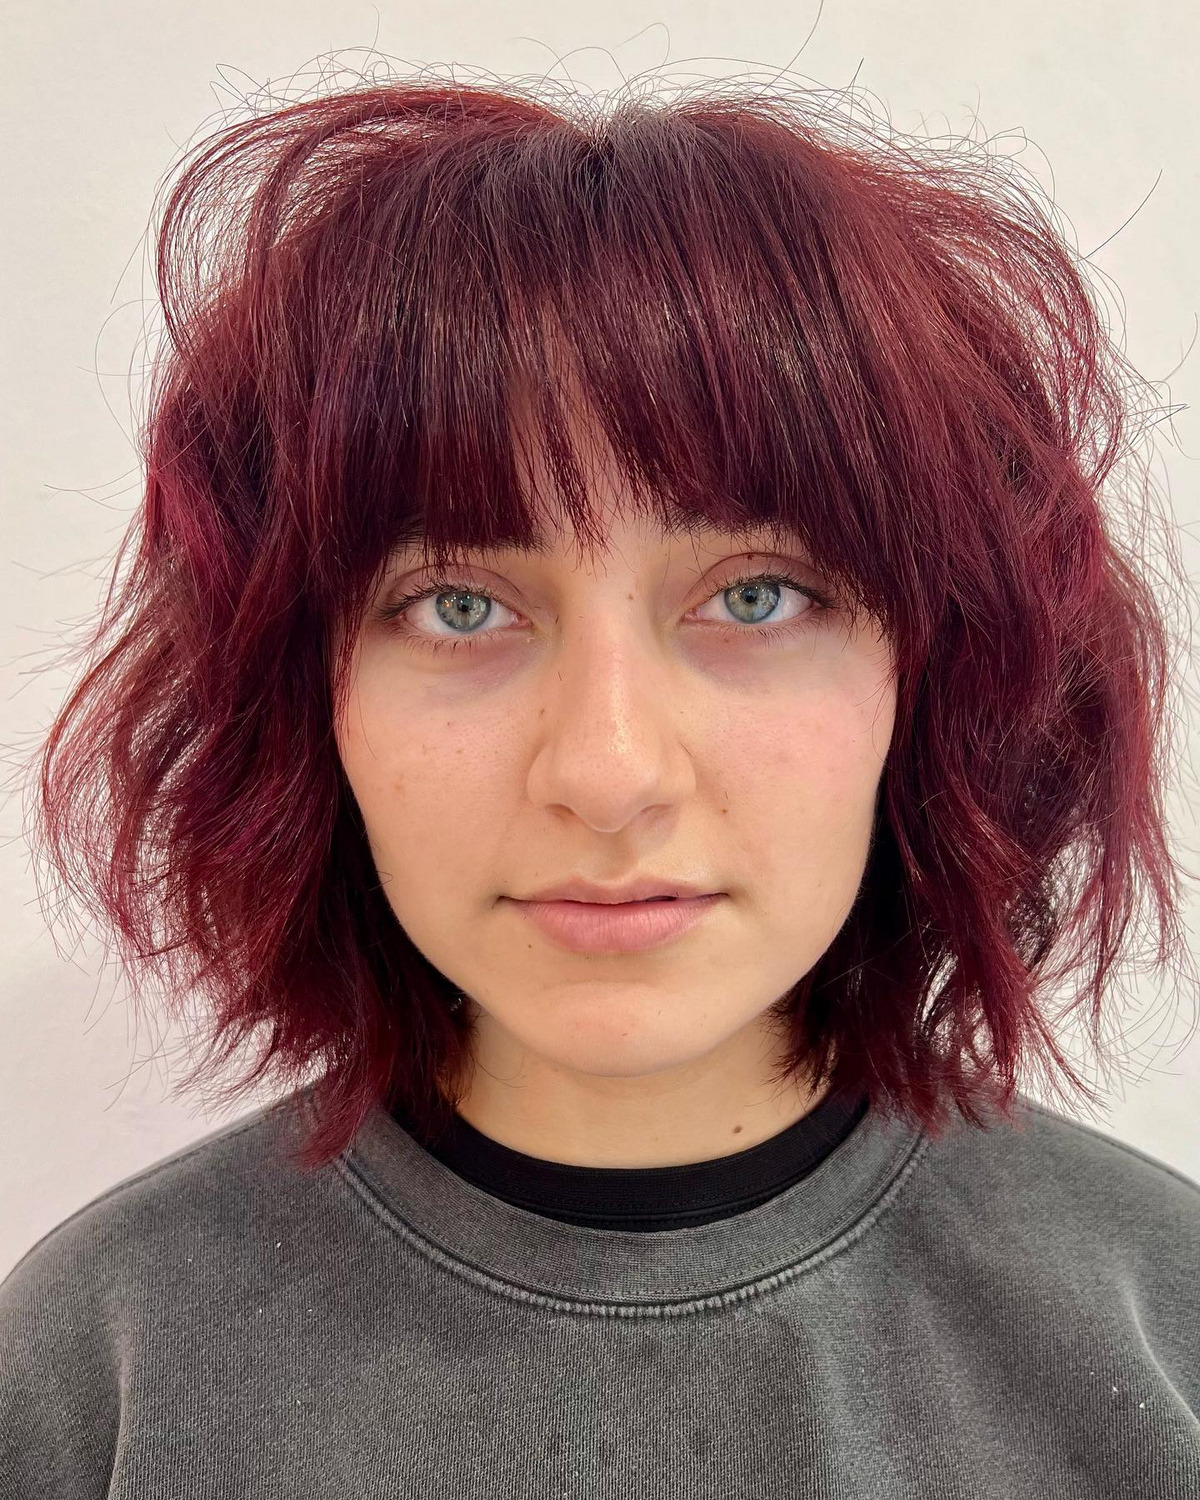 Layered Bob With Blunt Bangs